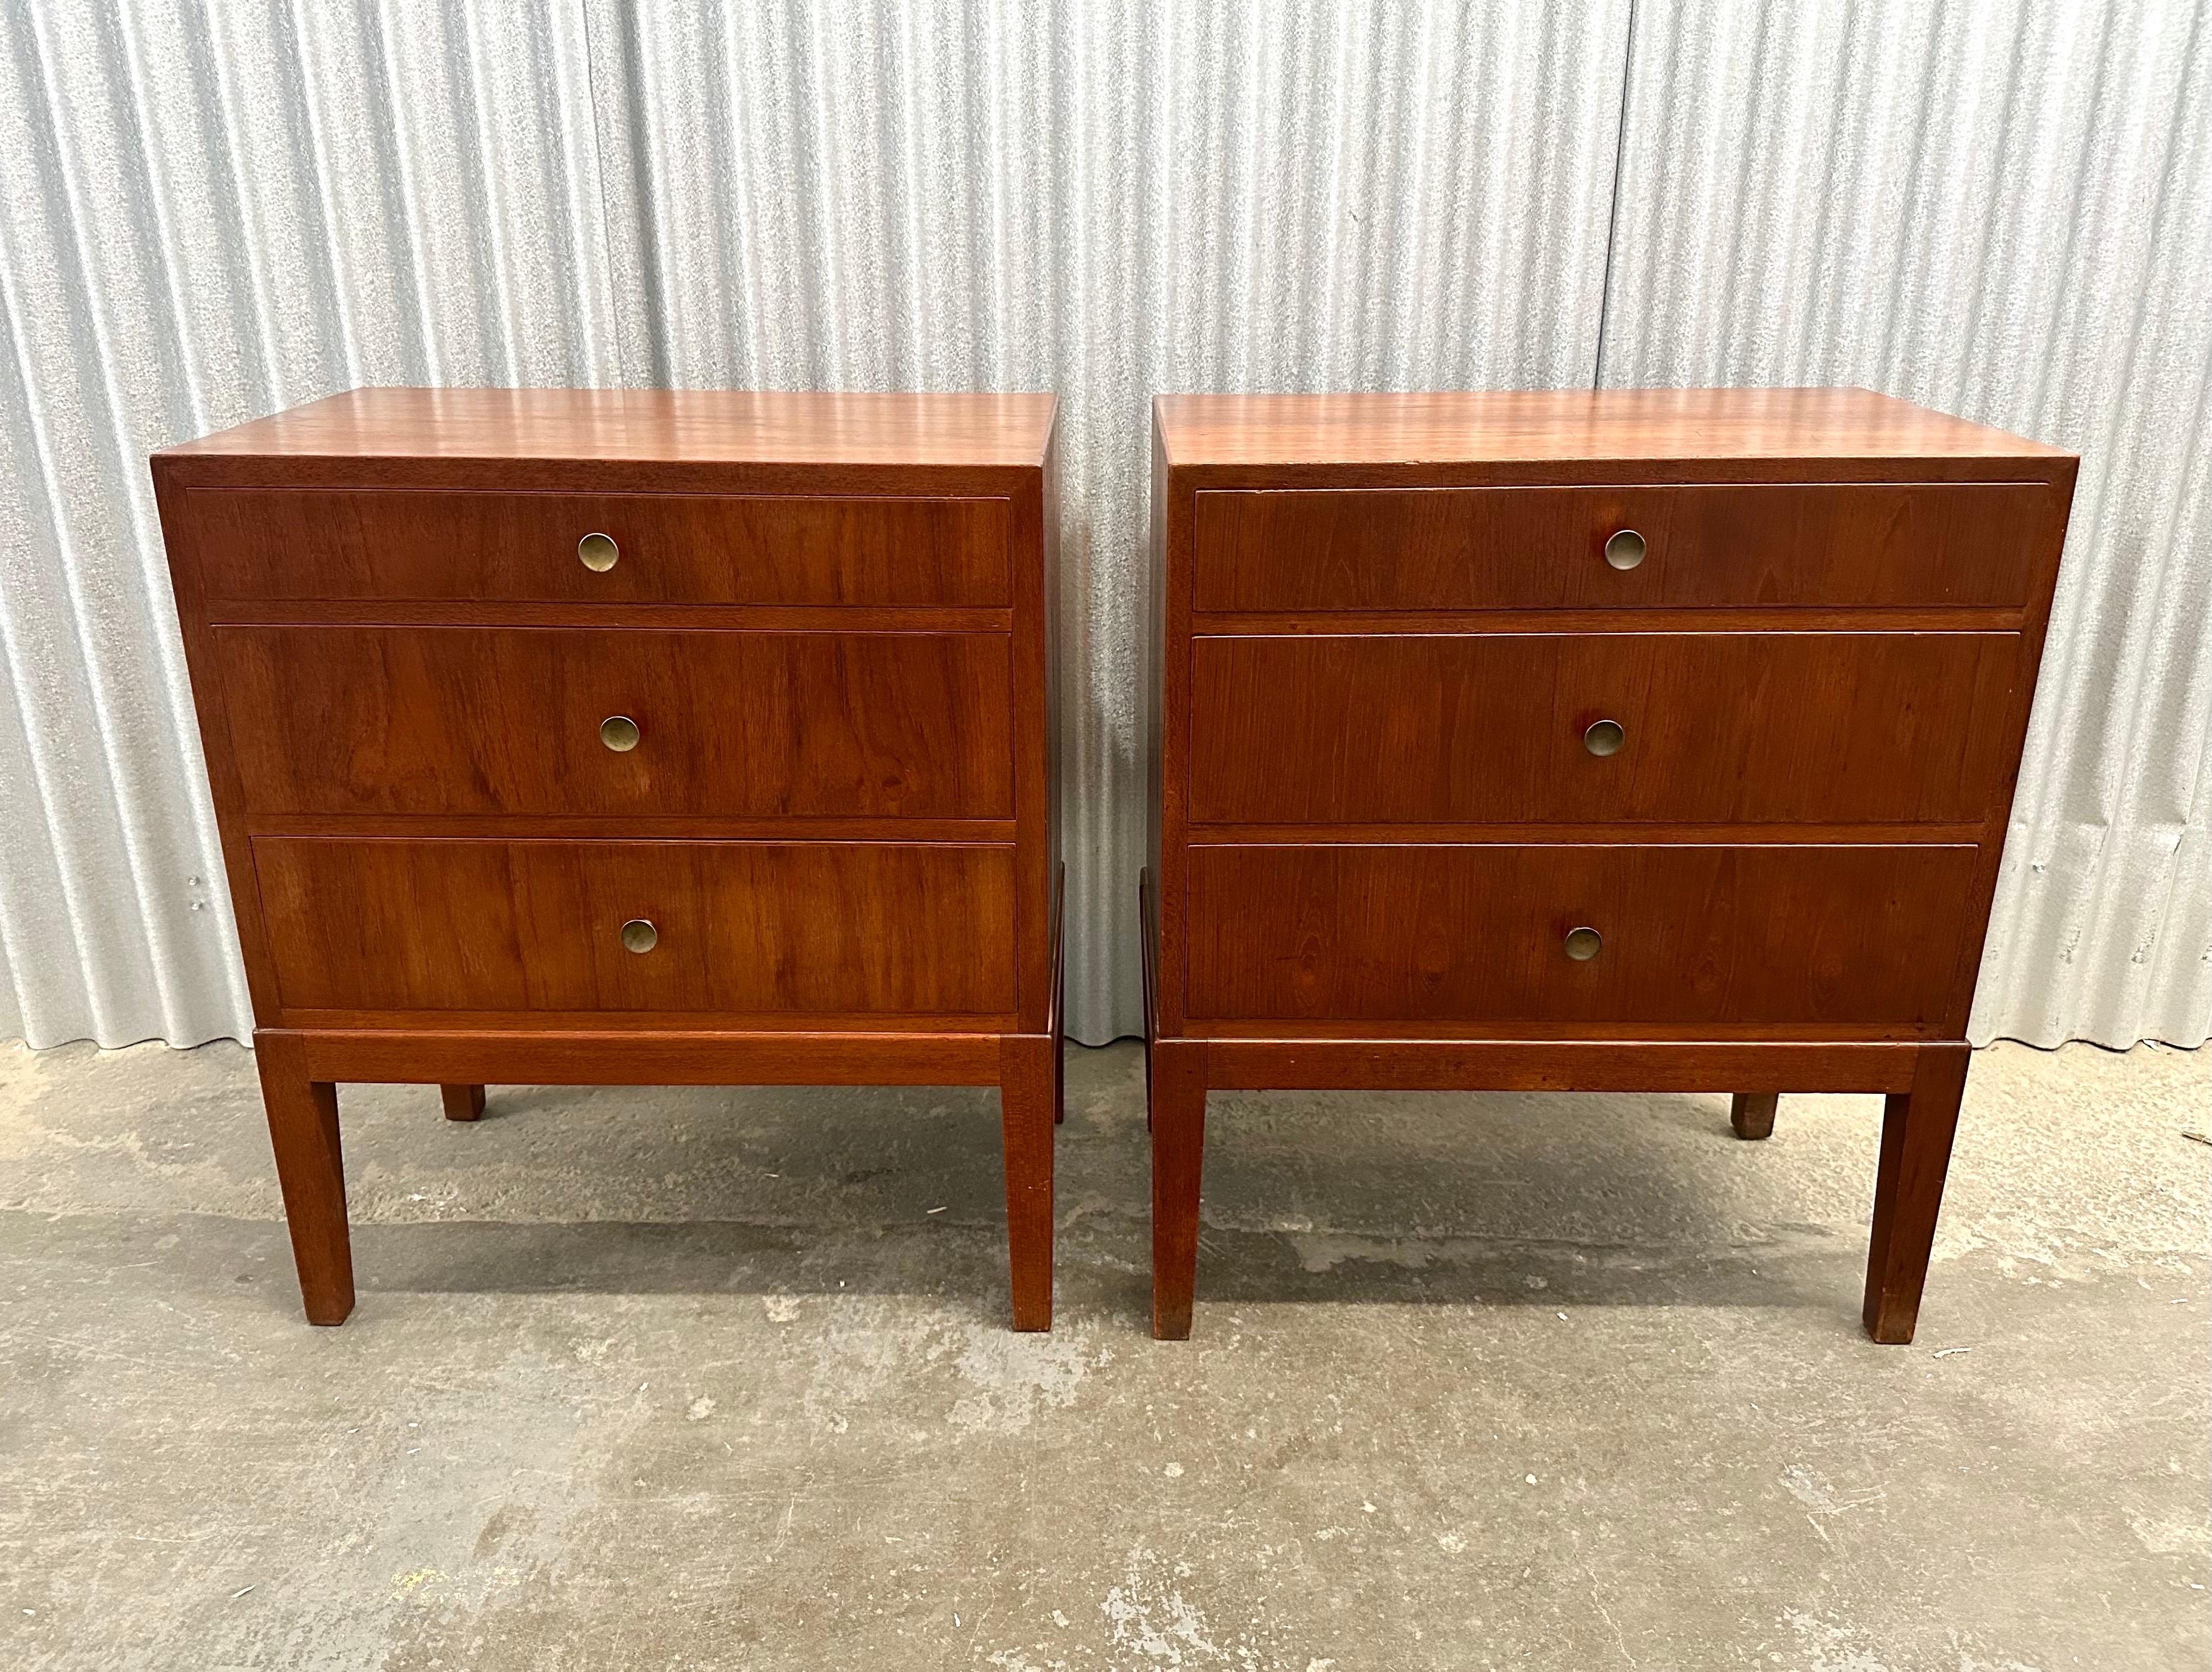 Pair of small chests of drawers in teak over birch. Slightly tapering body, brass pulls, and wonderful dark patina add to the overall elegance. A versatile size, the pair work well as nightstands, end tables, entryway consoles or silver drawers.  